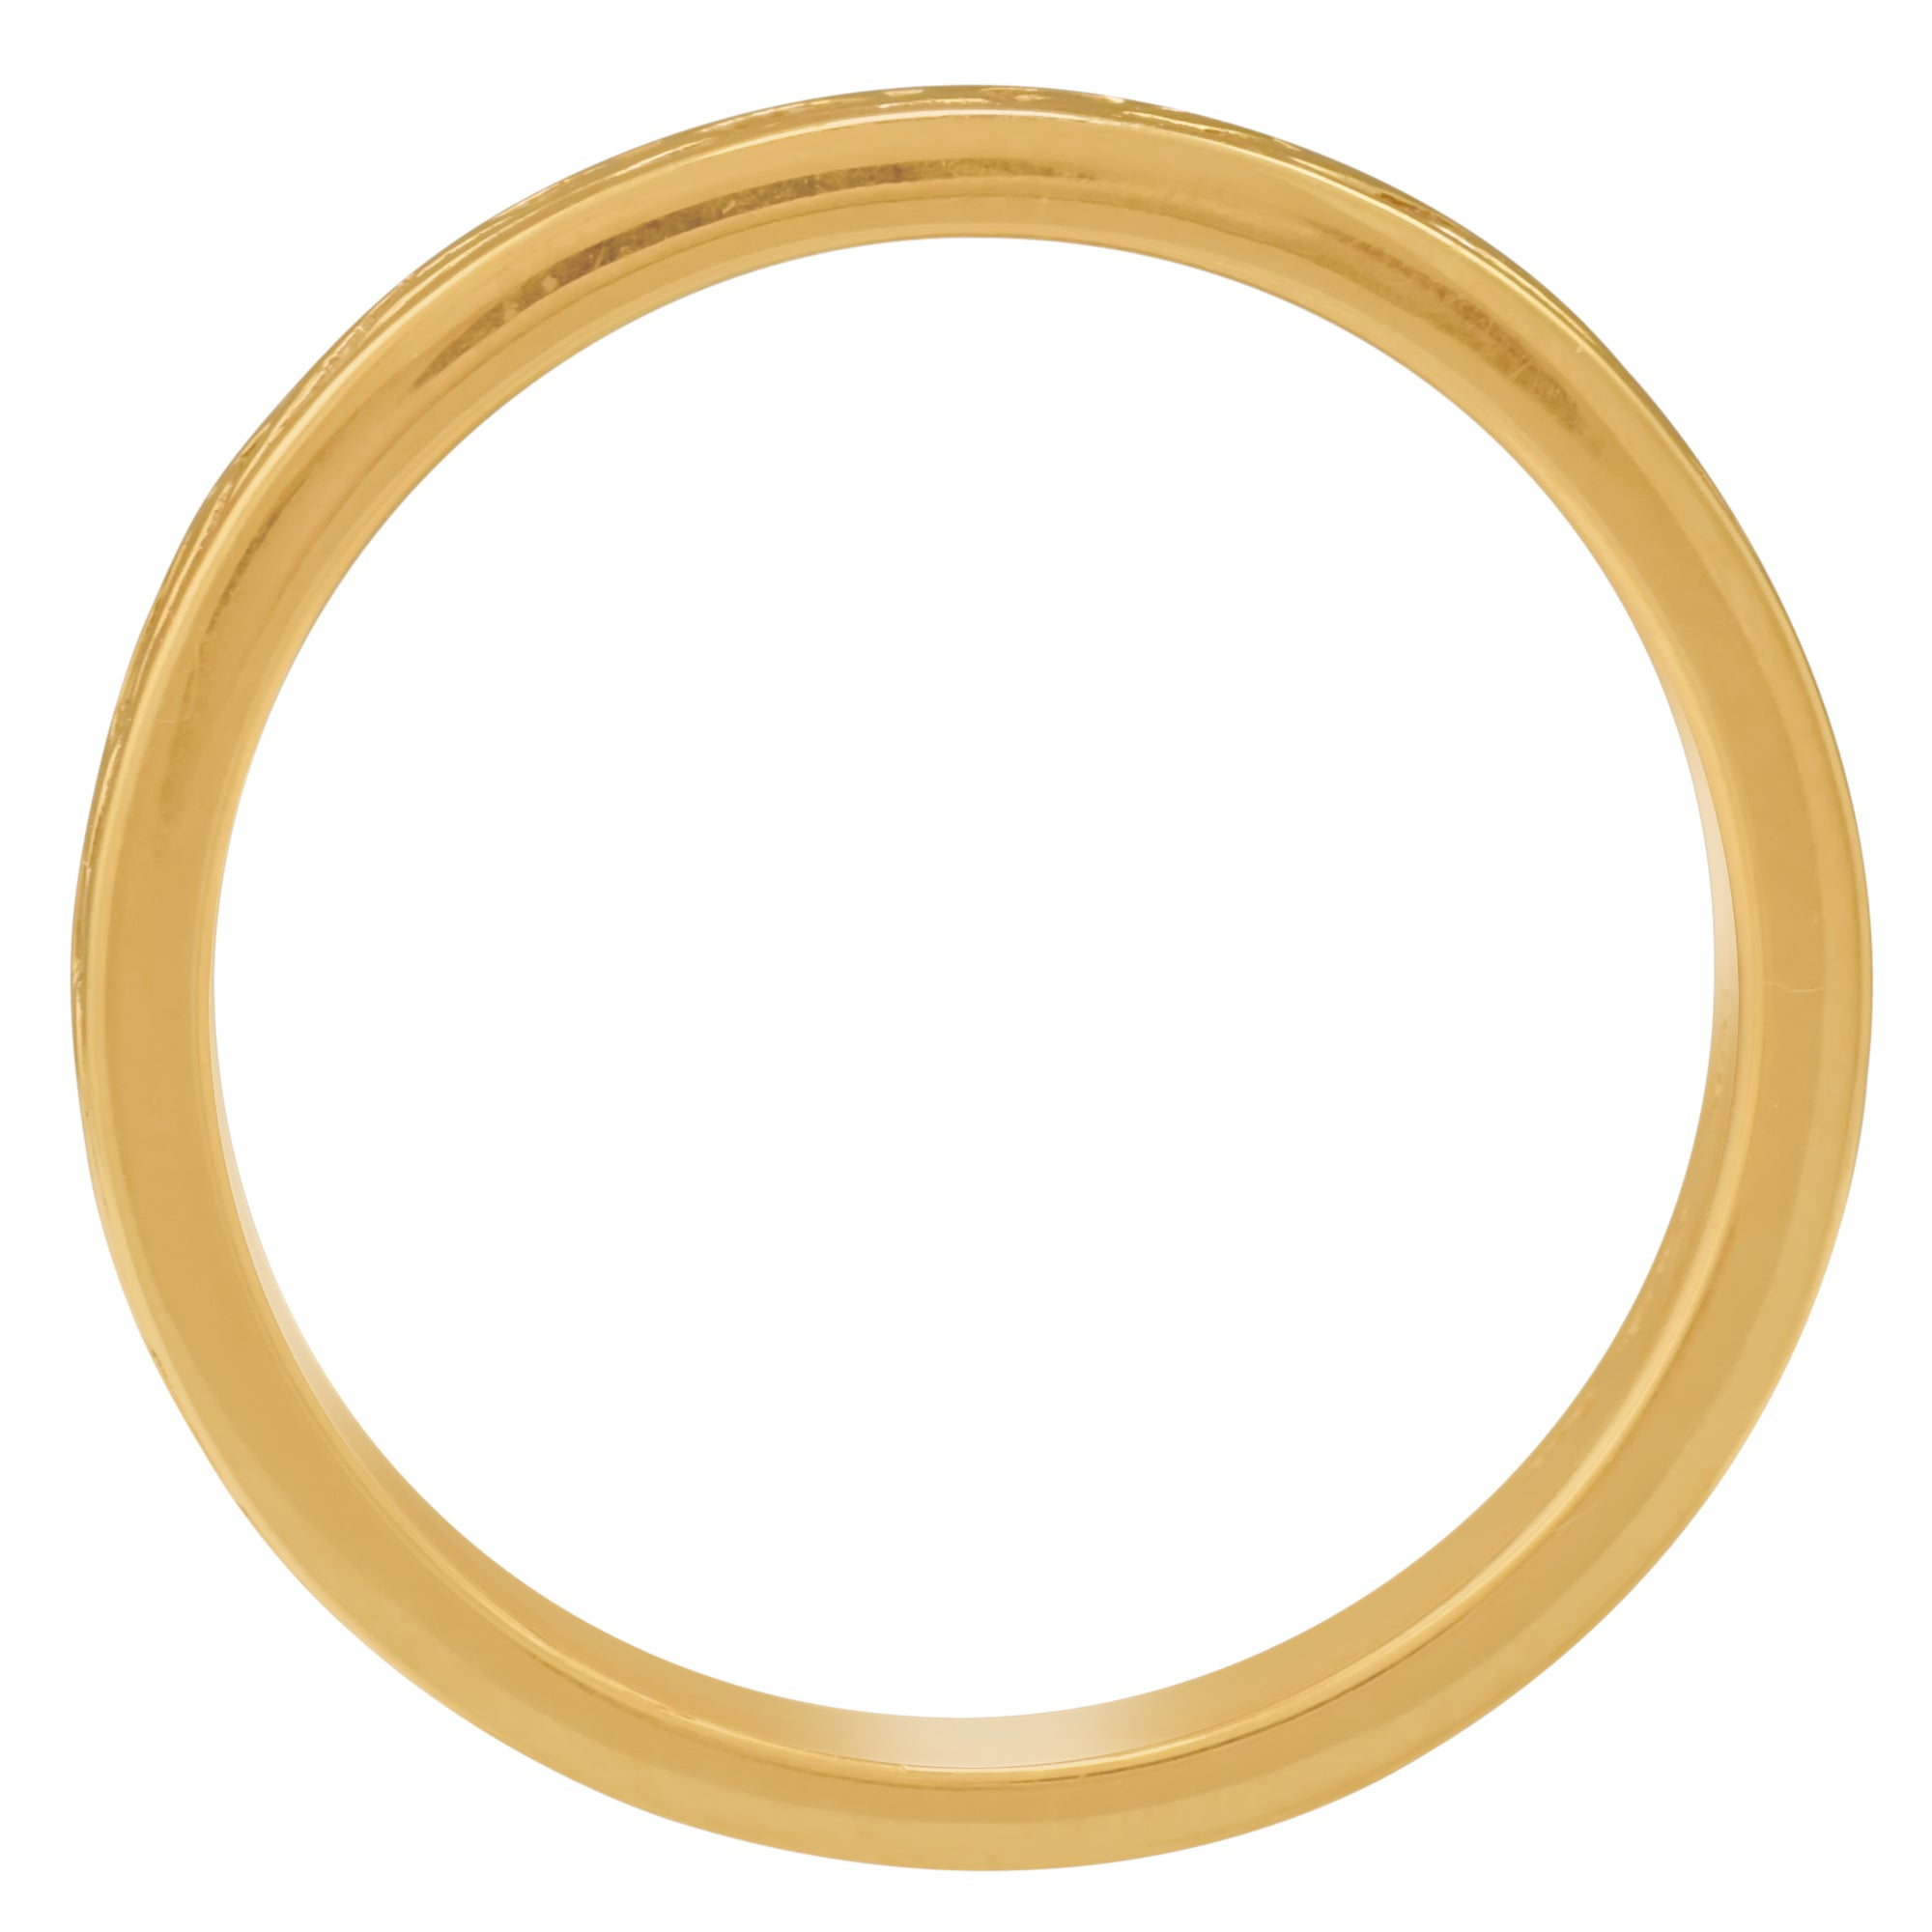 Keith Jack Devotion Knot Fern Wedding Band in 10kt Yellow Gold (3mm)